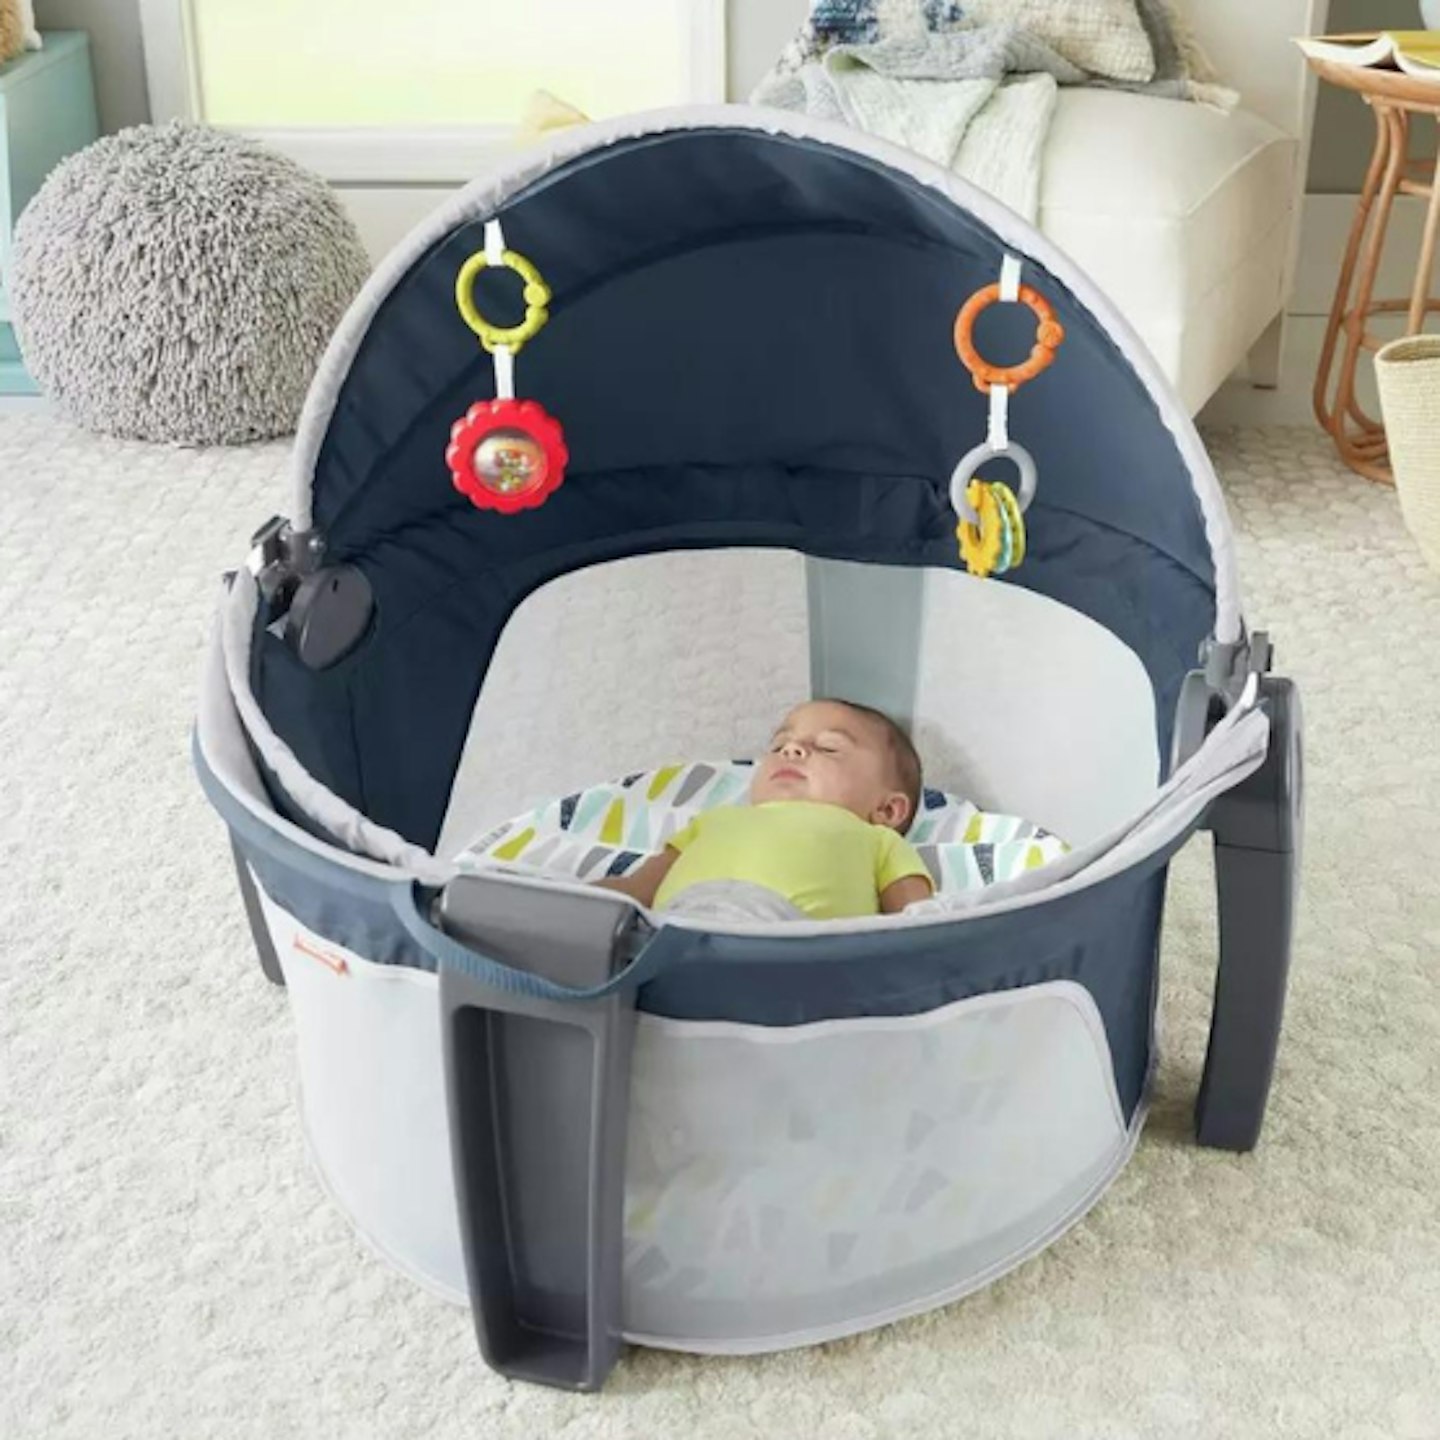 Black Friday baby deals travel dome